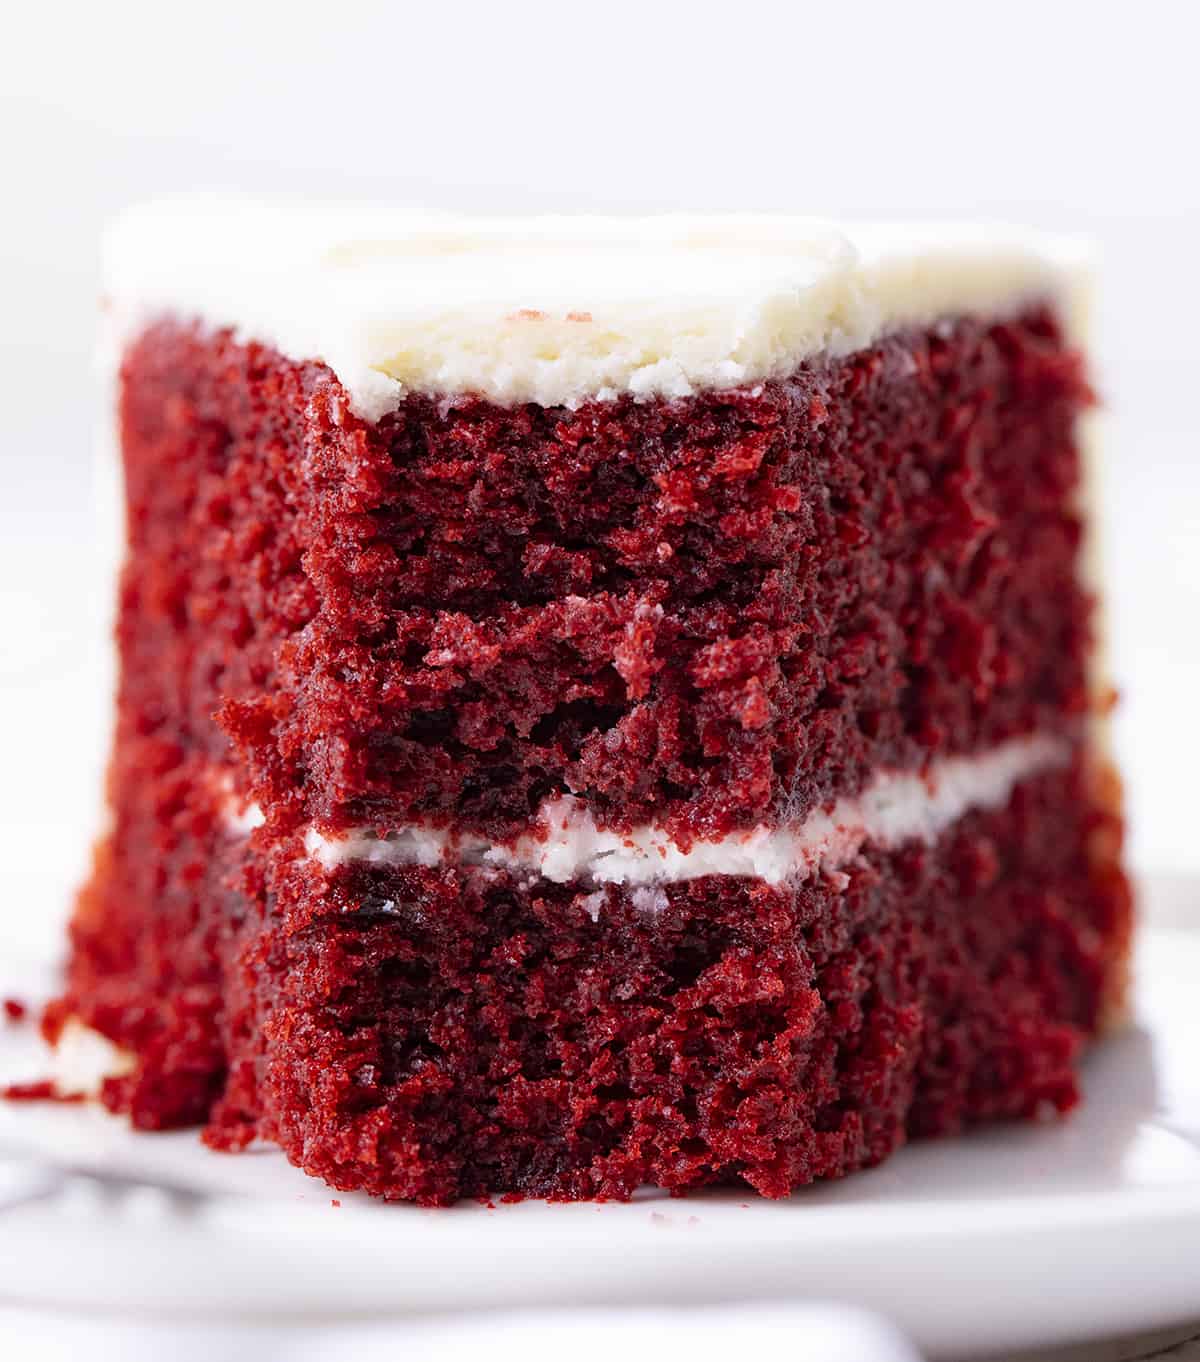 Piece of red velvet cake on a plate with a bite removed.